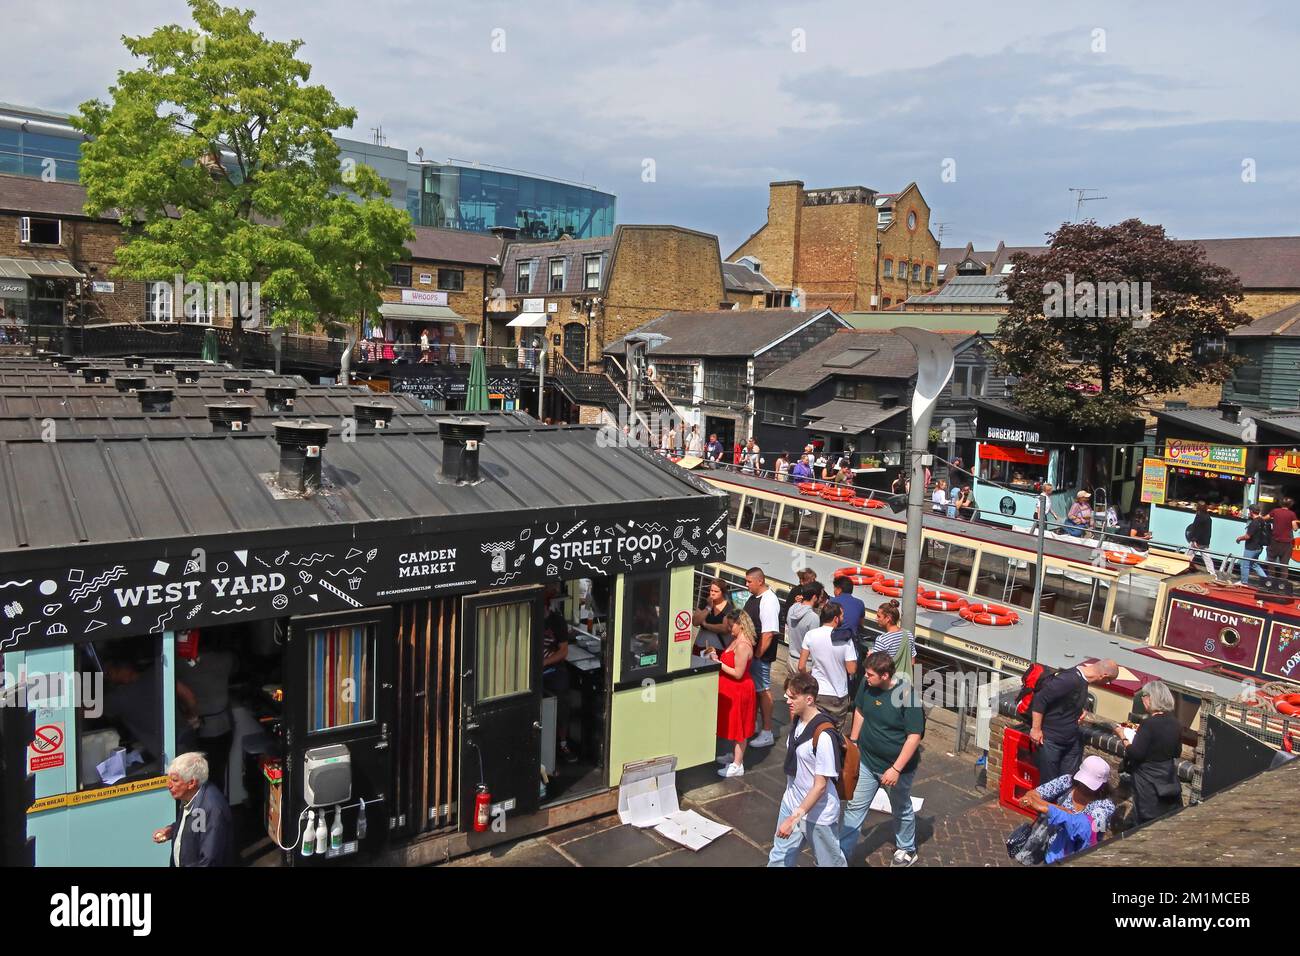 West Yard at Camden Locks, canal, boats and market, Lock Place, Camden, London, England, UK, NW1 8AF Stock Photo